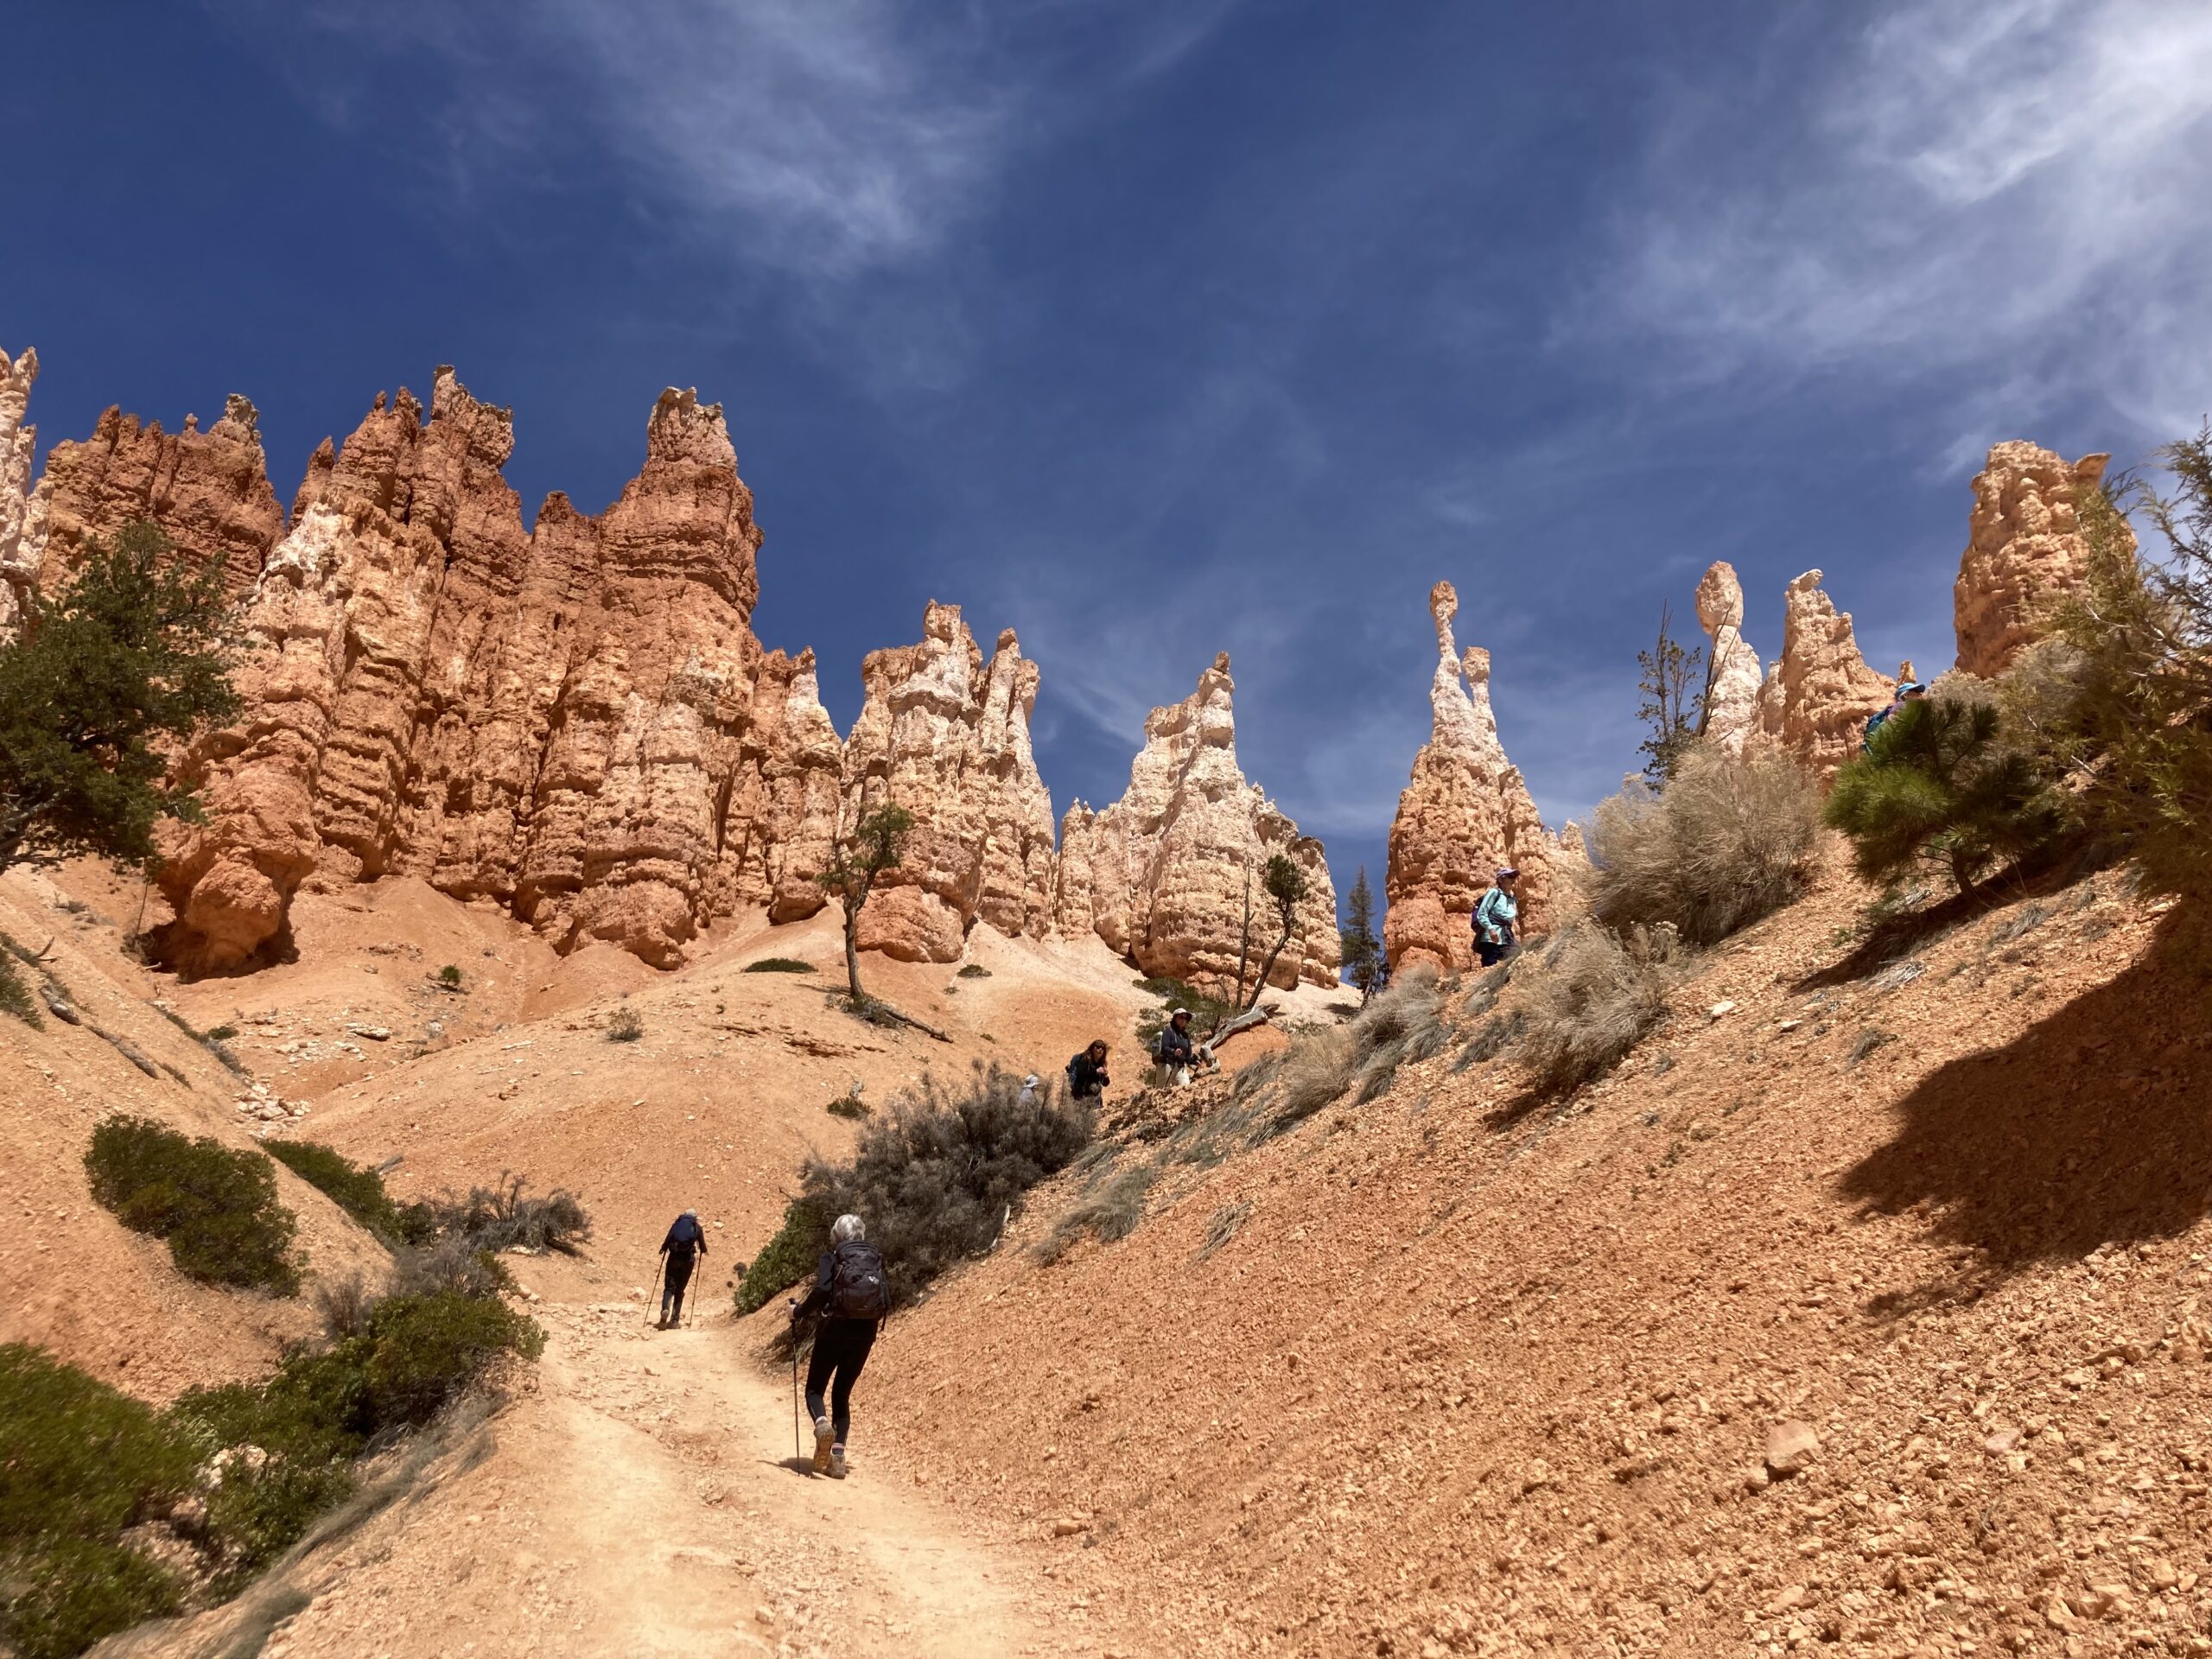 Hikers work their way along a trail that runs between the majestic, towering rock structures of the national park in Utag - Hiking Utah's Majestic Parks - Adventures in Good Company